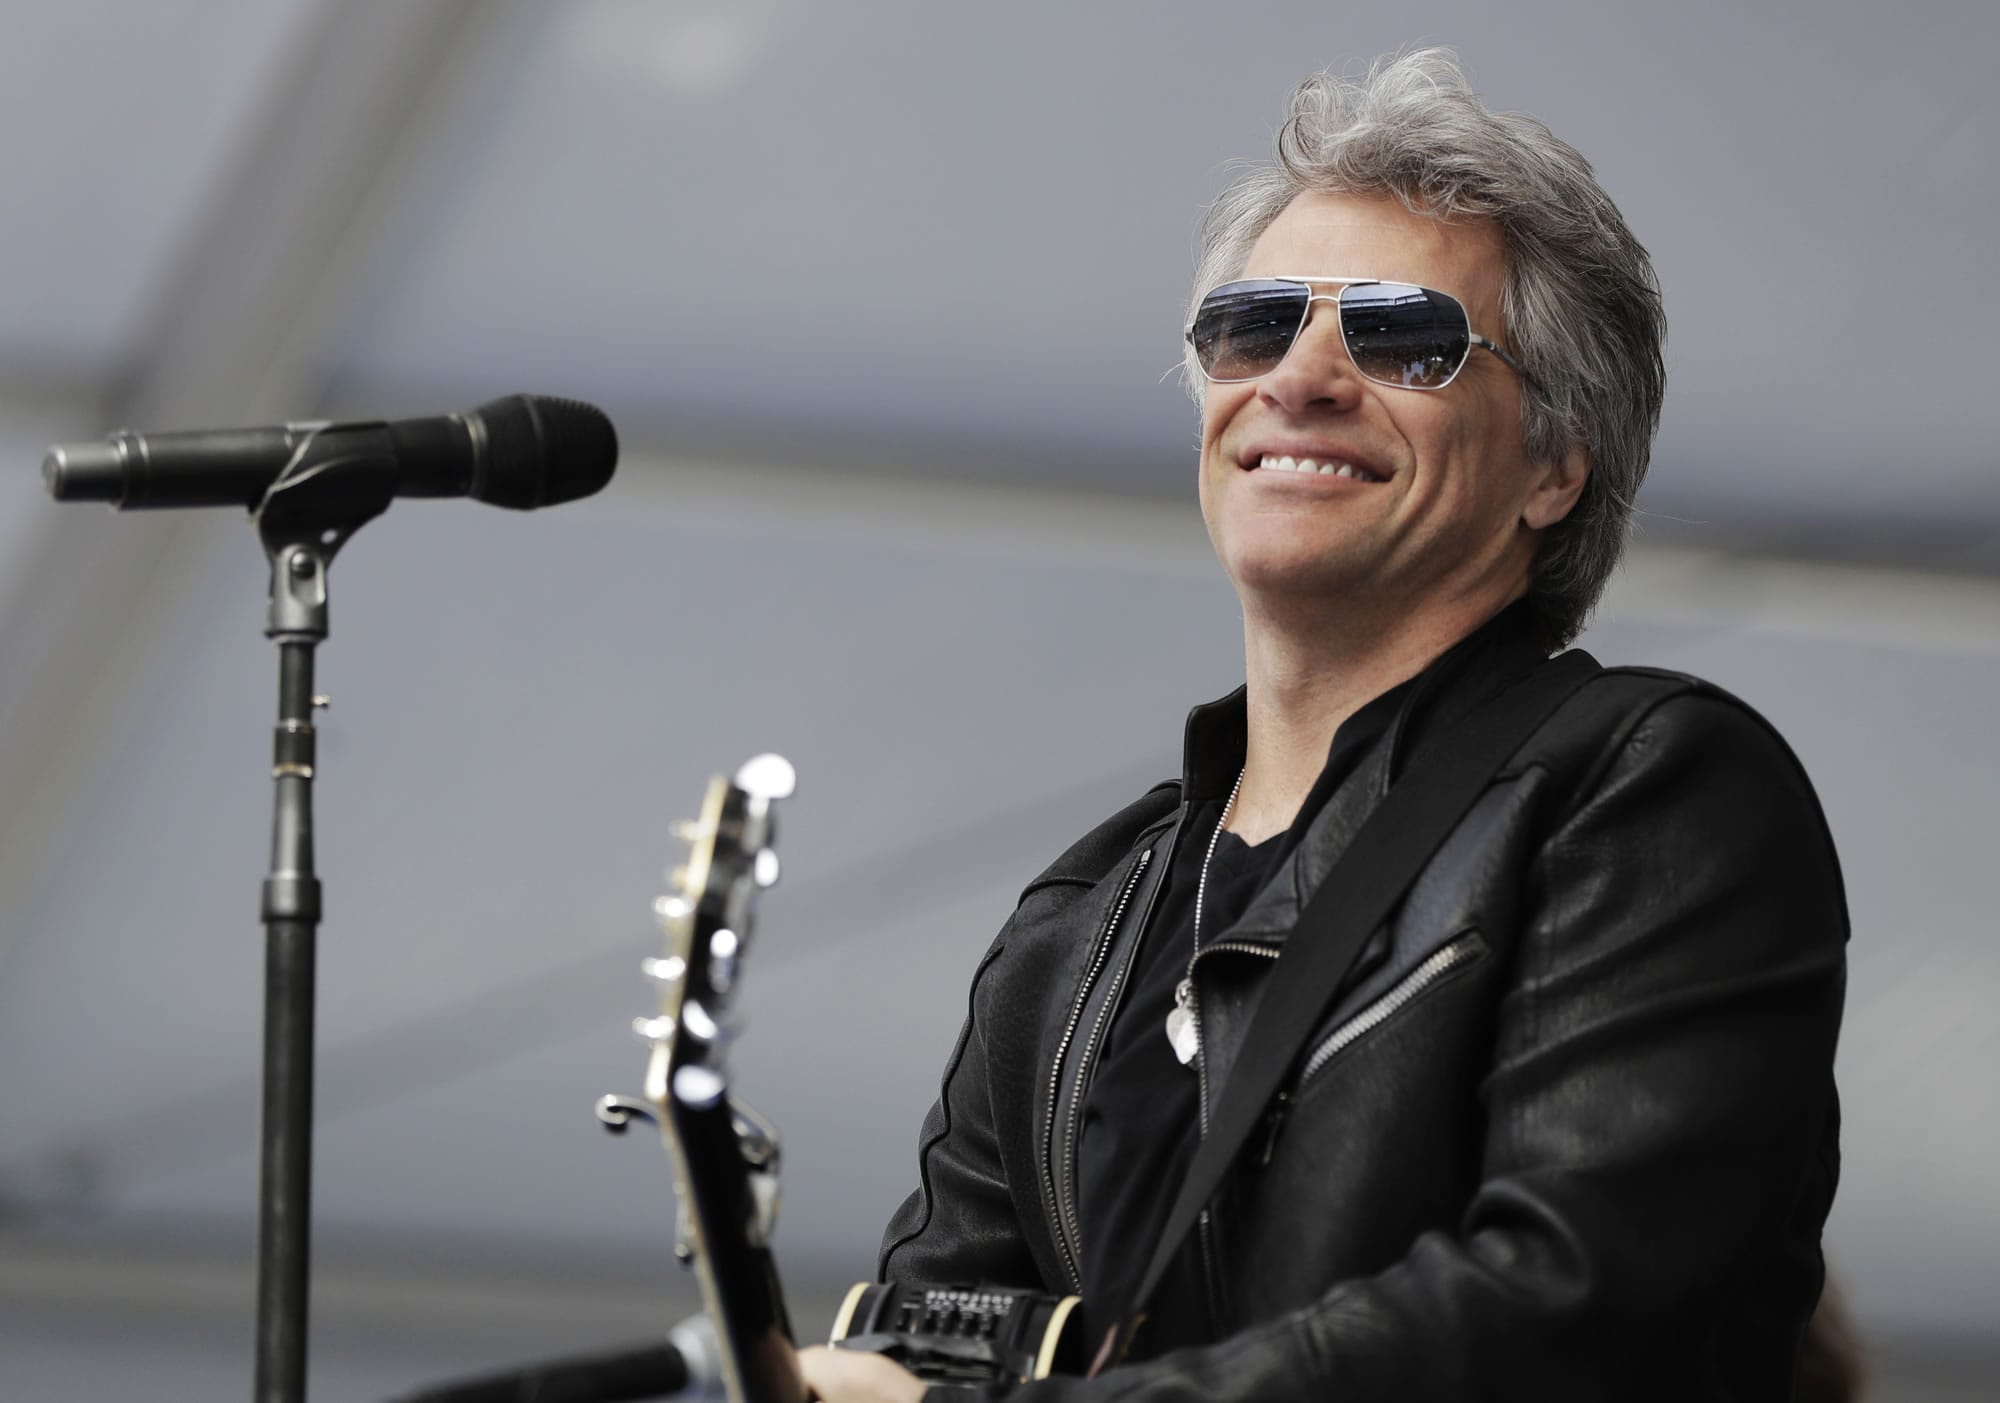 Musician Jon Bon Jovi performs during a surprise appearance at the Fairleigh Dickinson University commencement ceremony, Tuesday, May 16, 2017, at MetLife Stadium in East Rutherford, N.J. The school won a nationwide contest to bring the New Jersey-based band Bon Jovi to play their graduation by generating the most interest on social media.